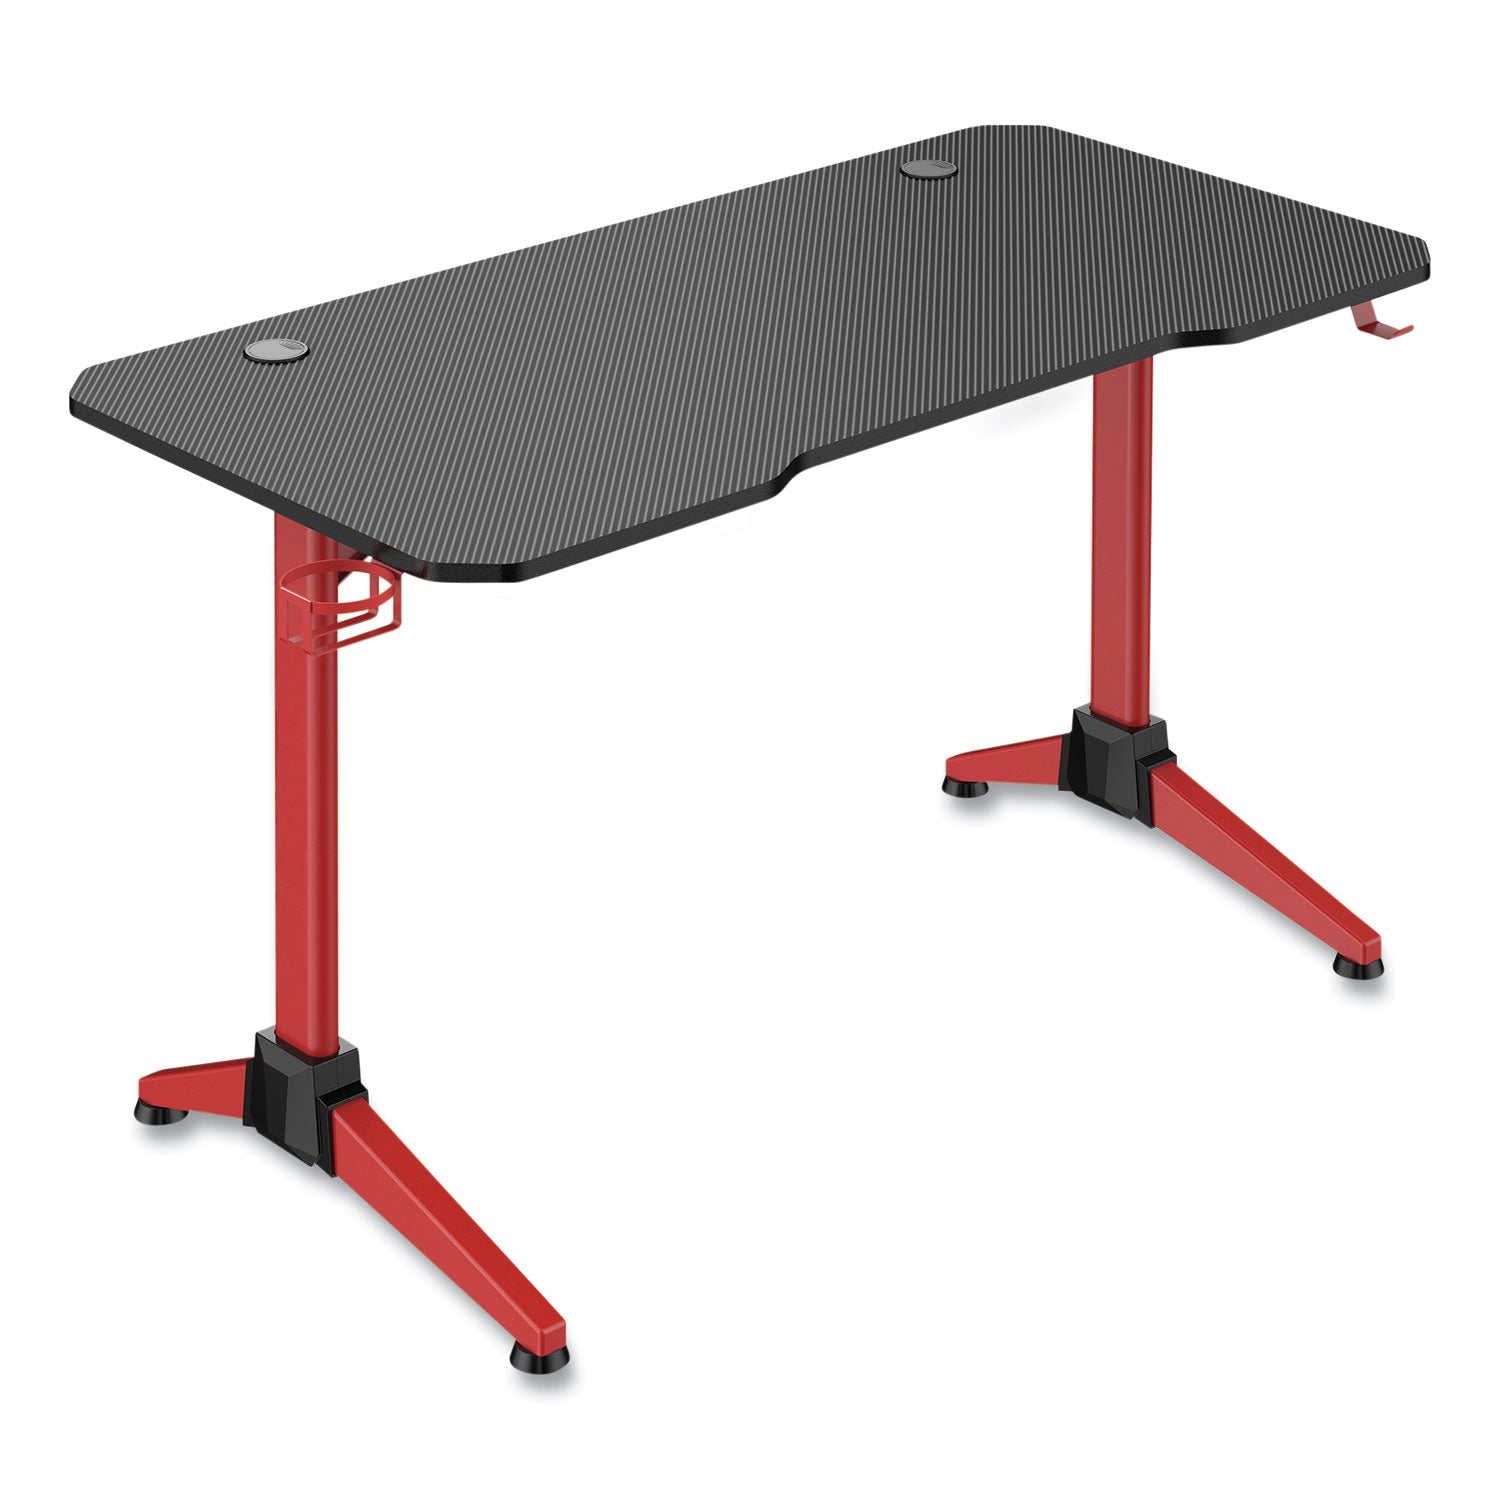 ultimate-computer-gaming-desk-472-x-236-x-295-black-red-ships-in-1-3-business-days_saf5393rd - 2